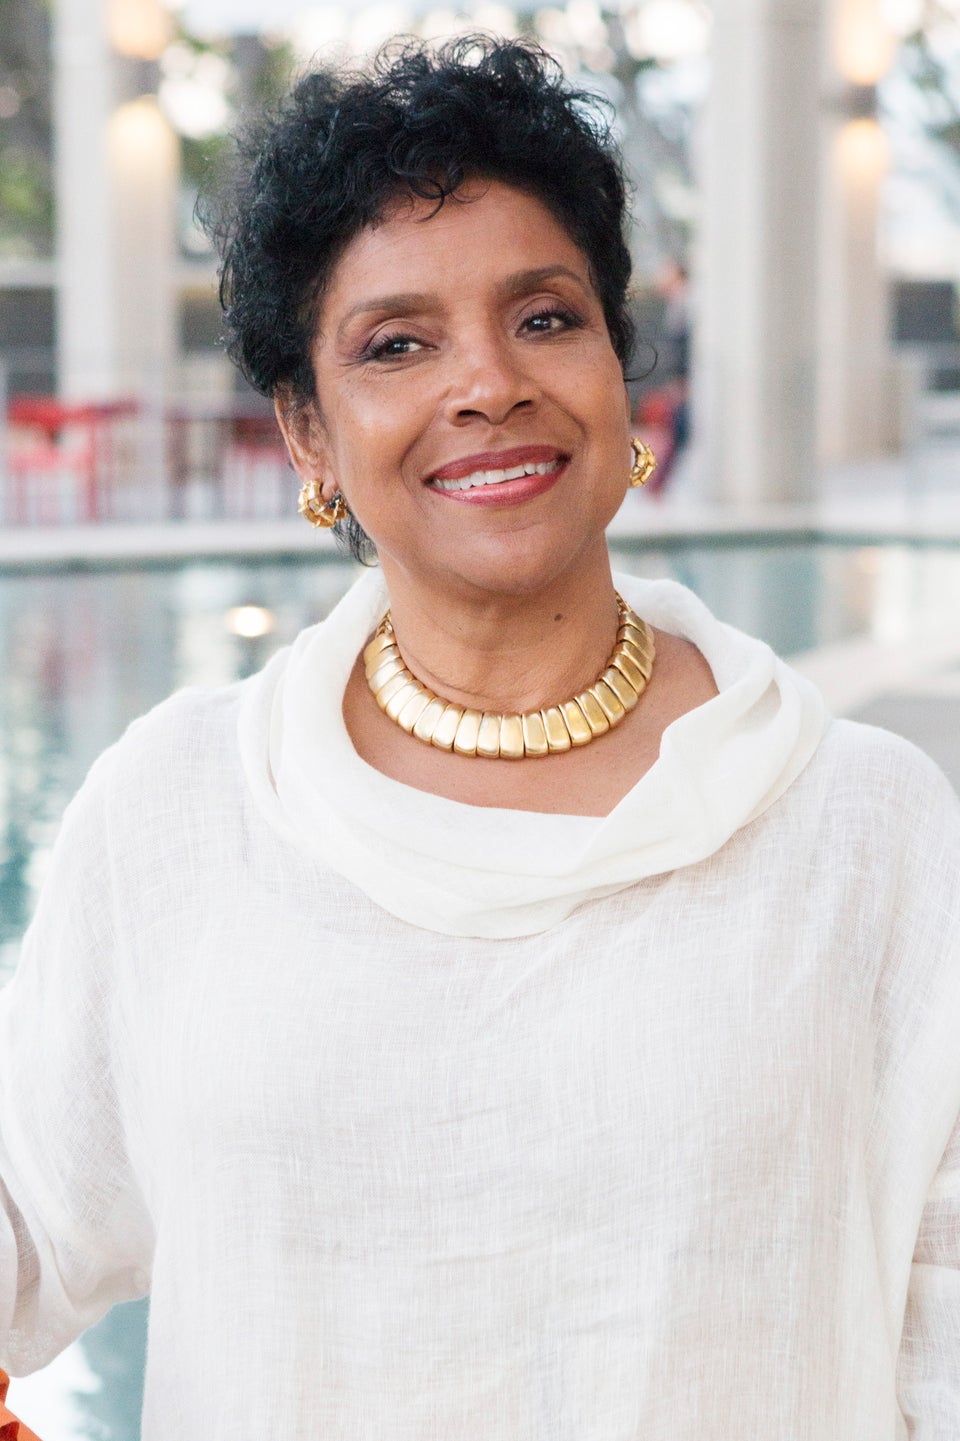 Here’s Your First Look At Phylicia Rashad In ‘This Is Us’